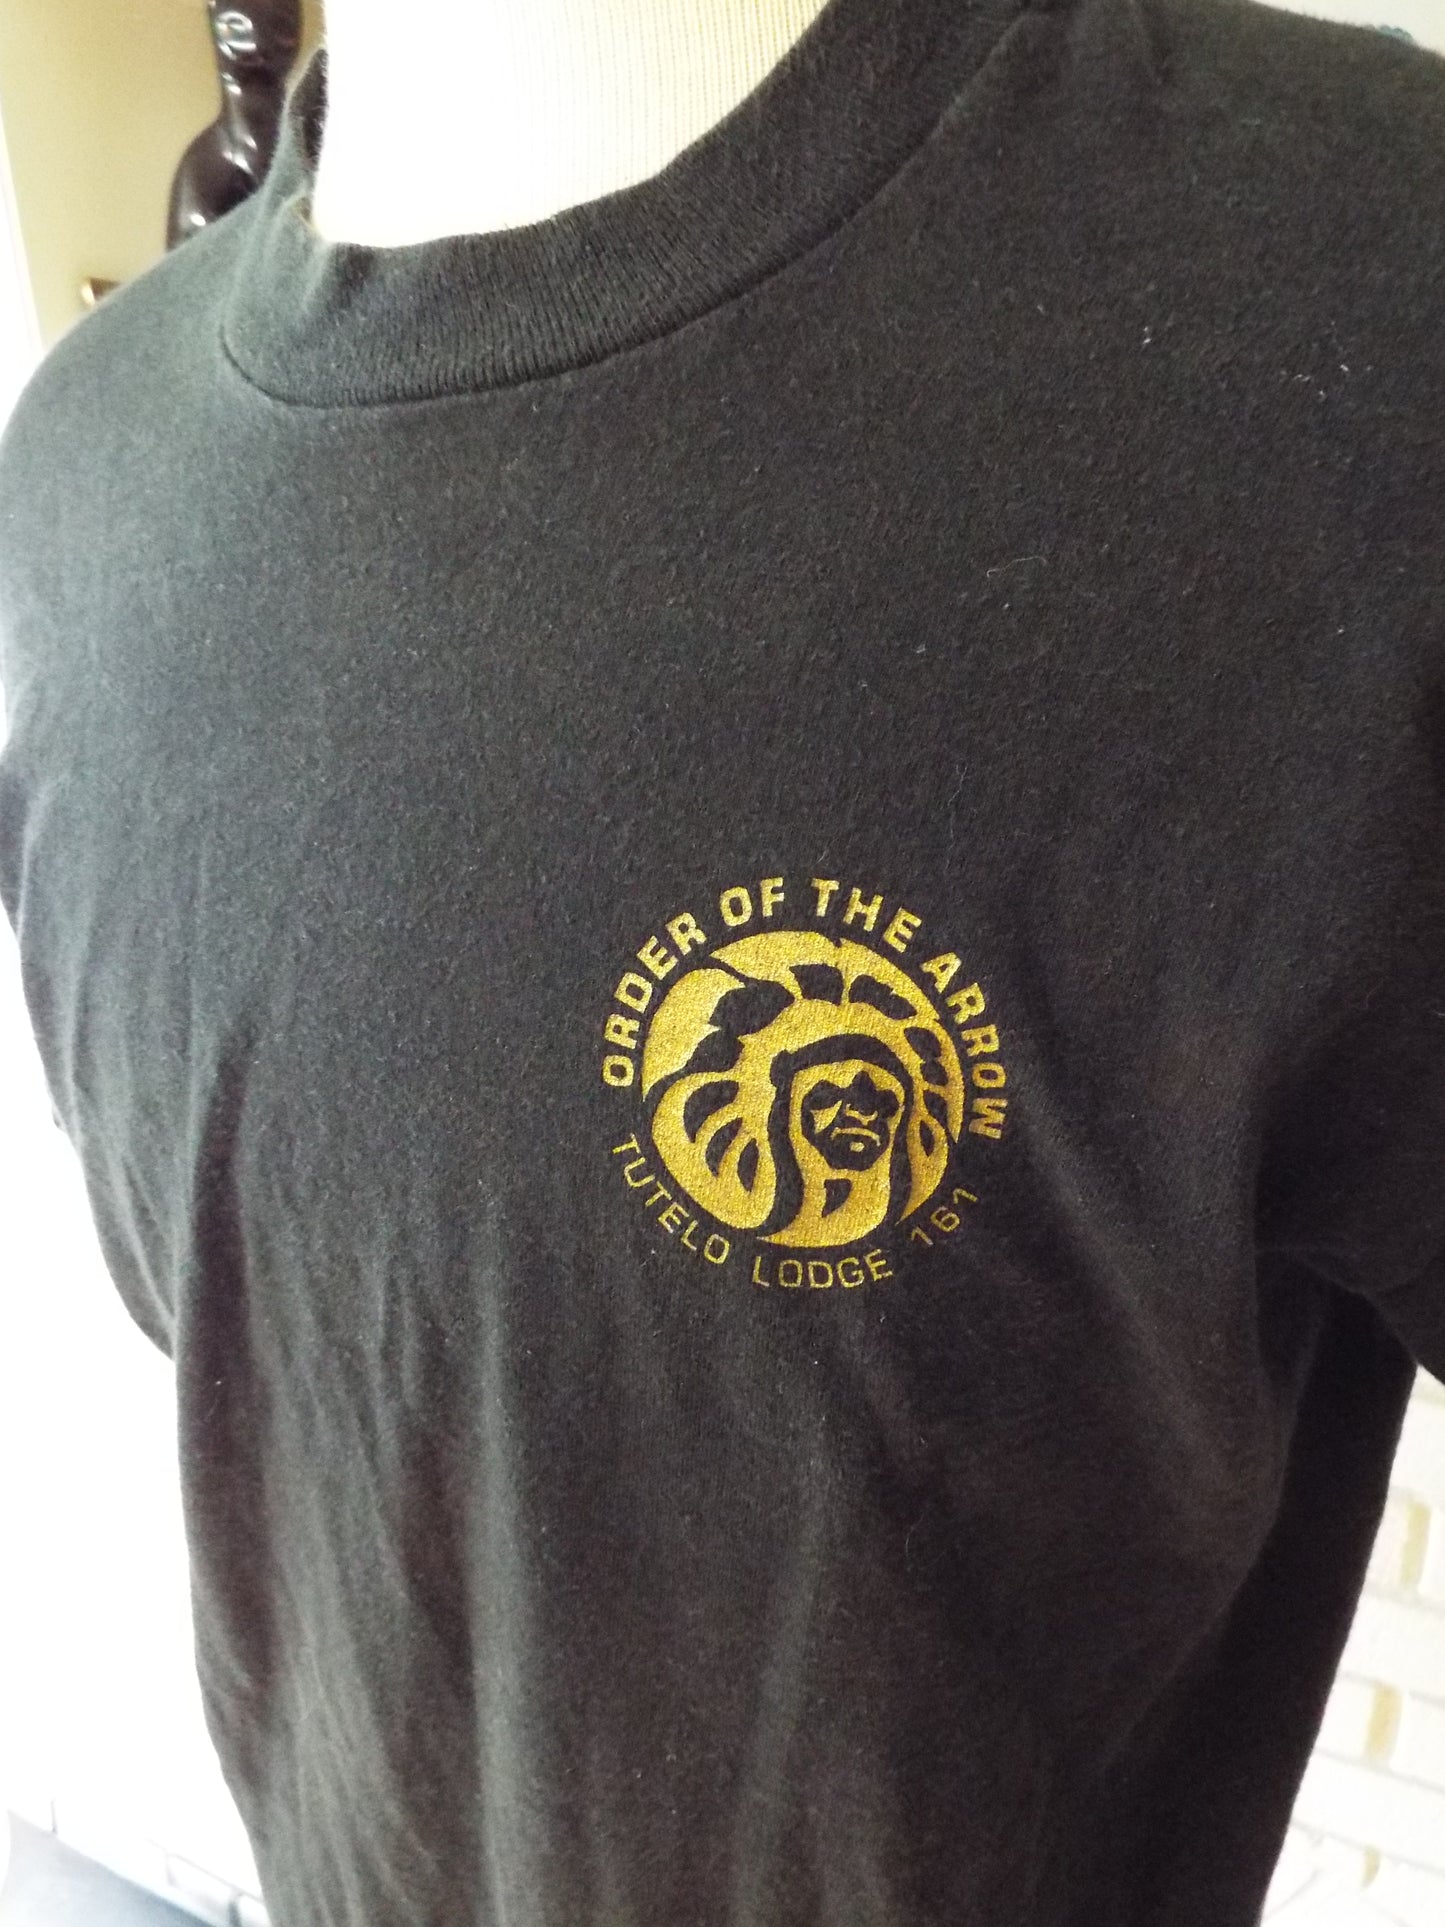 Vintage Order of the Arrow T-Shirt by Fruit of the Loom